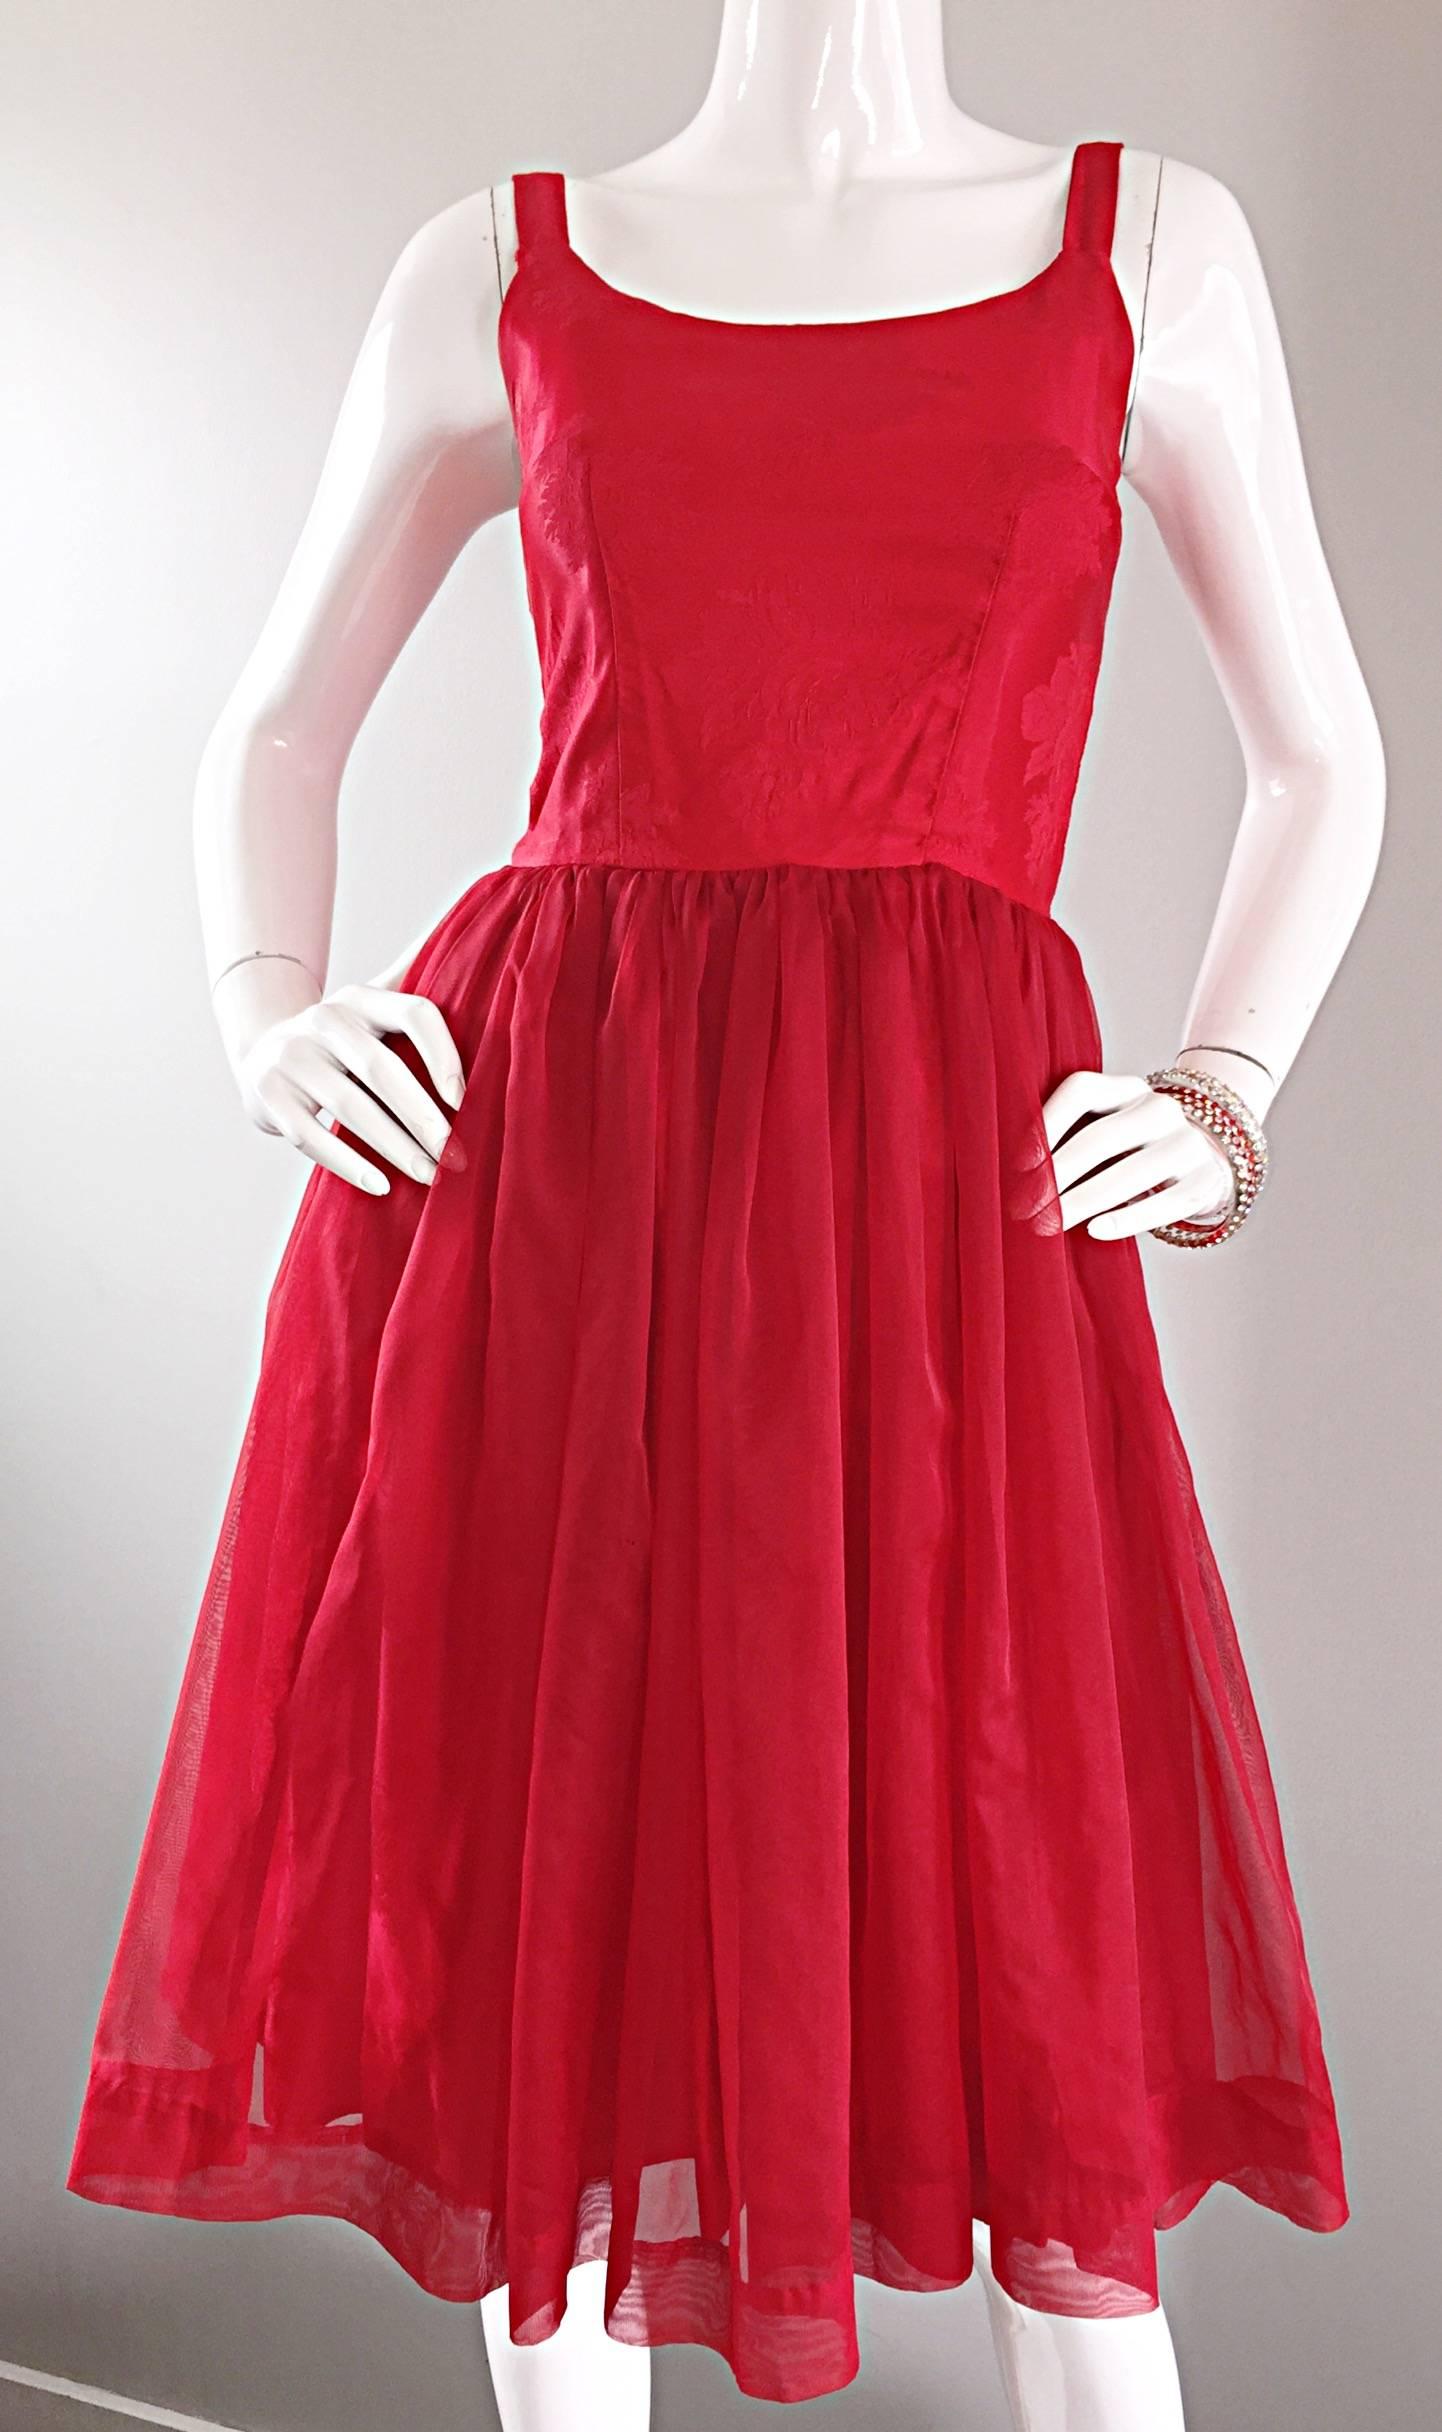 Women's Gorgeous 1950s 50s Lipstick Red Demi Couture Silk Brocade Cocktail Dress